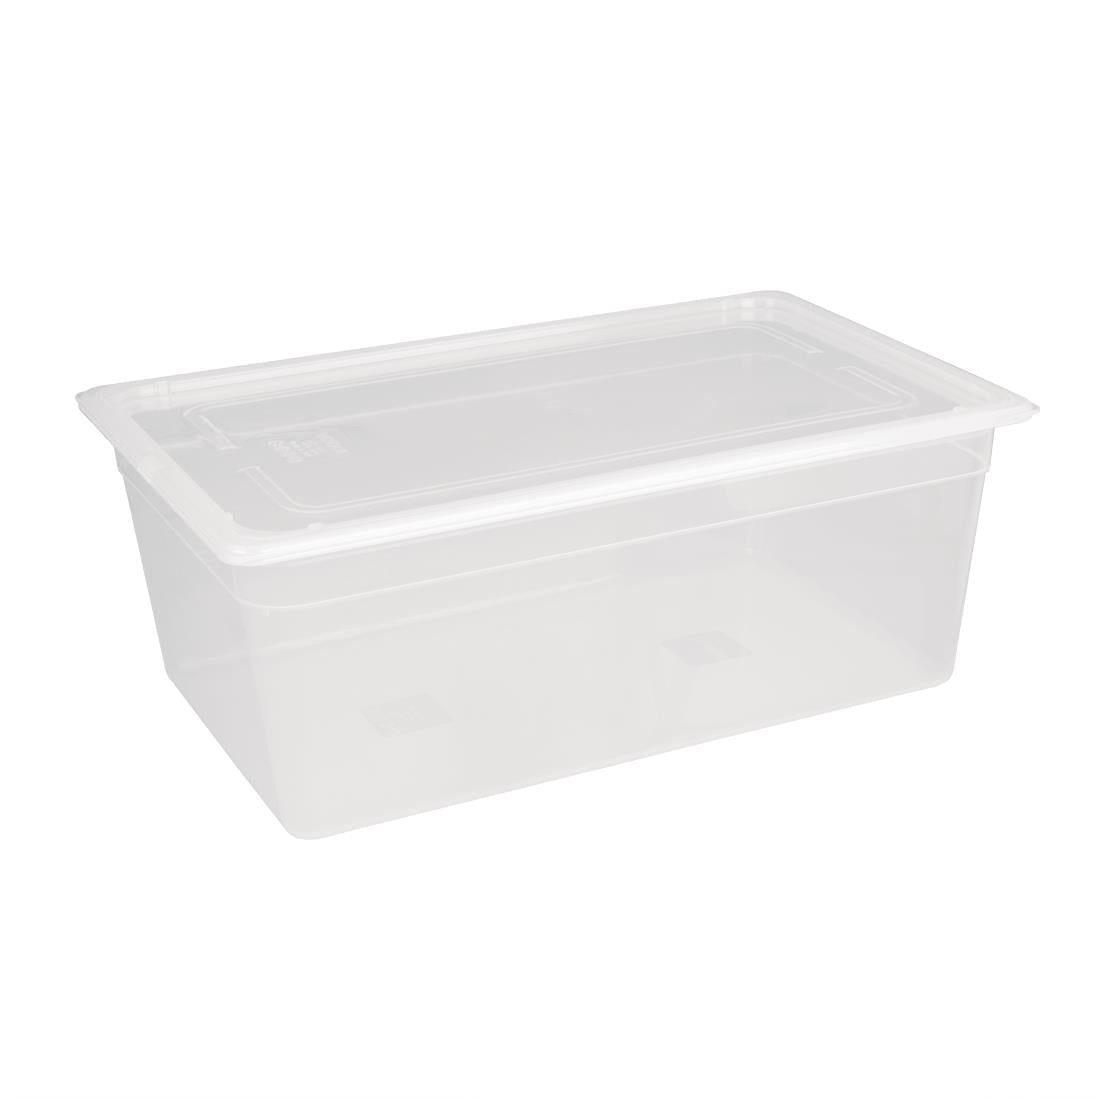 GJ513 Vogue Polypropylene 1/1 Gastronorm Container with Lid 200mm (Pack of 2) JD Catering Equipment Solutions Ltd